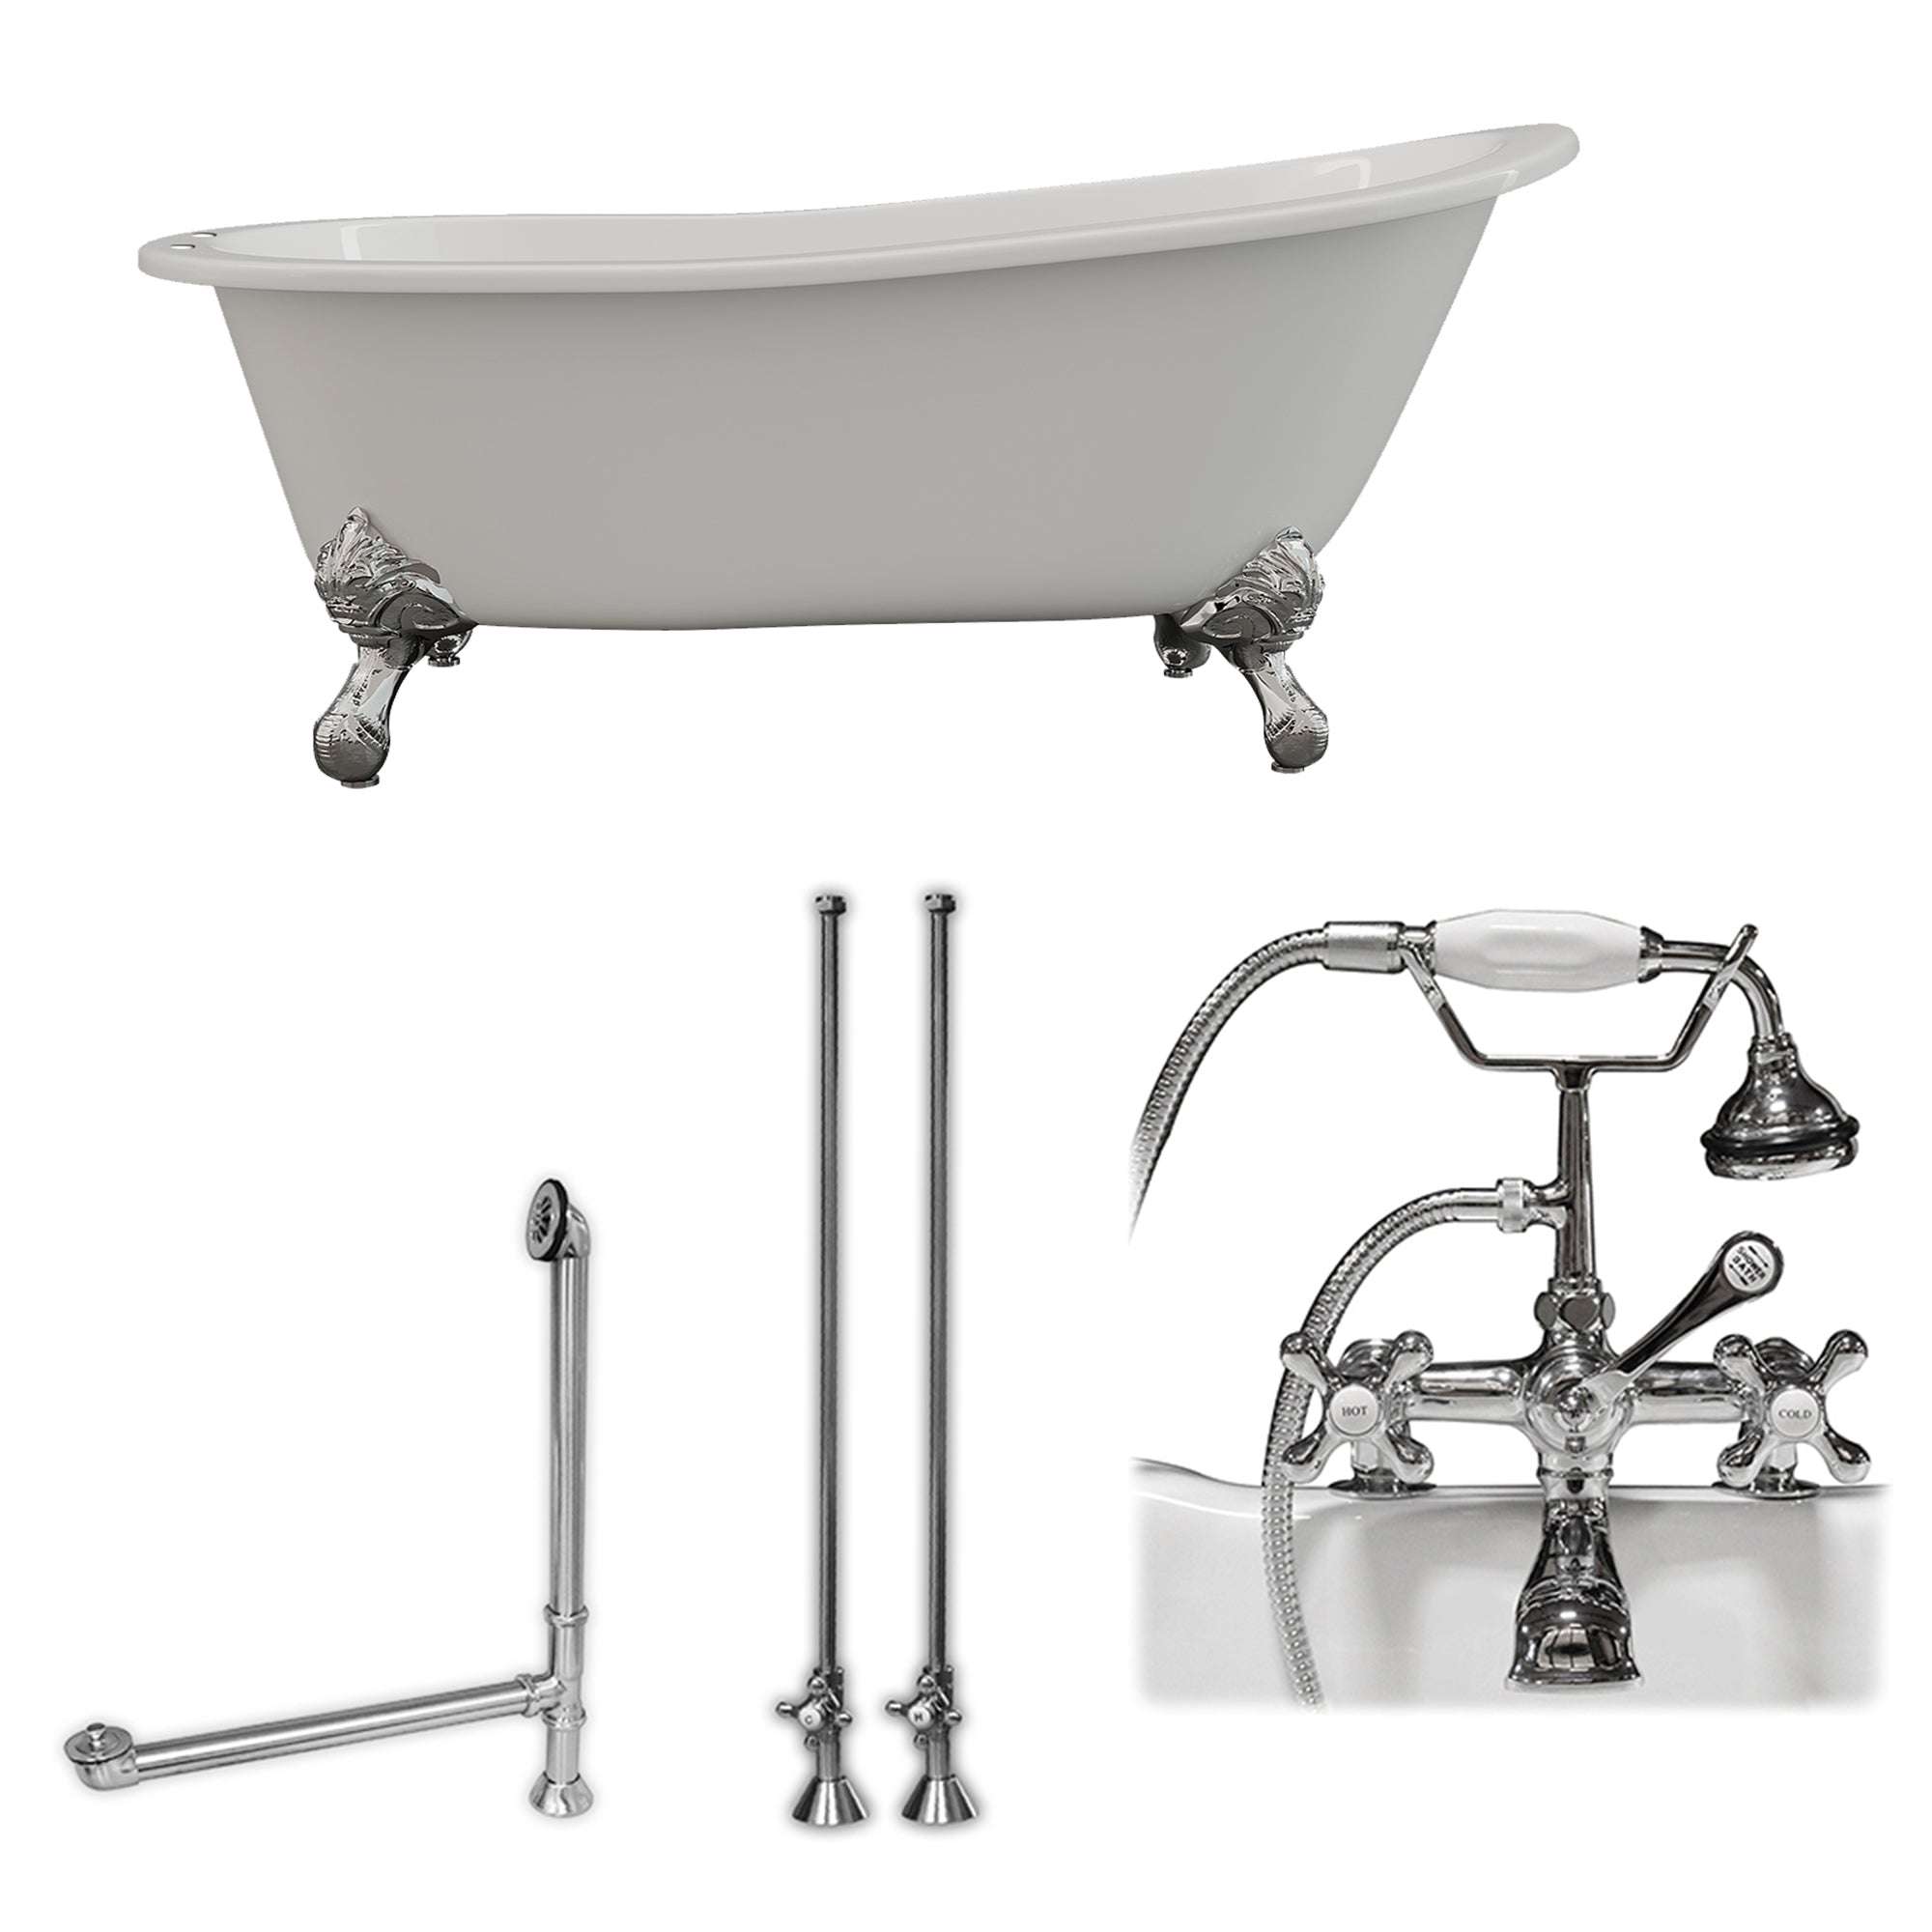 Cambridge Plumbing 67-Inch Slipper Cast Iron Clawfoot Tub (Porcelain enamel interior and white paint exterior) and Deck Mount Plumbing Package (Brushed Nickel) ST67-463D-2-PKG-7DH - Vital Hydrotherapy